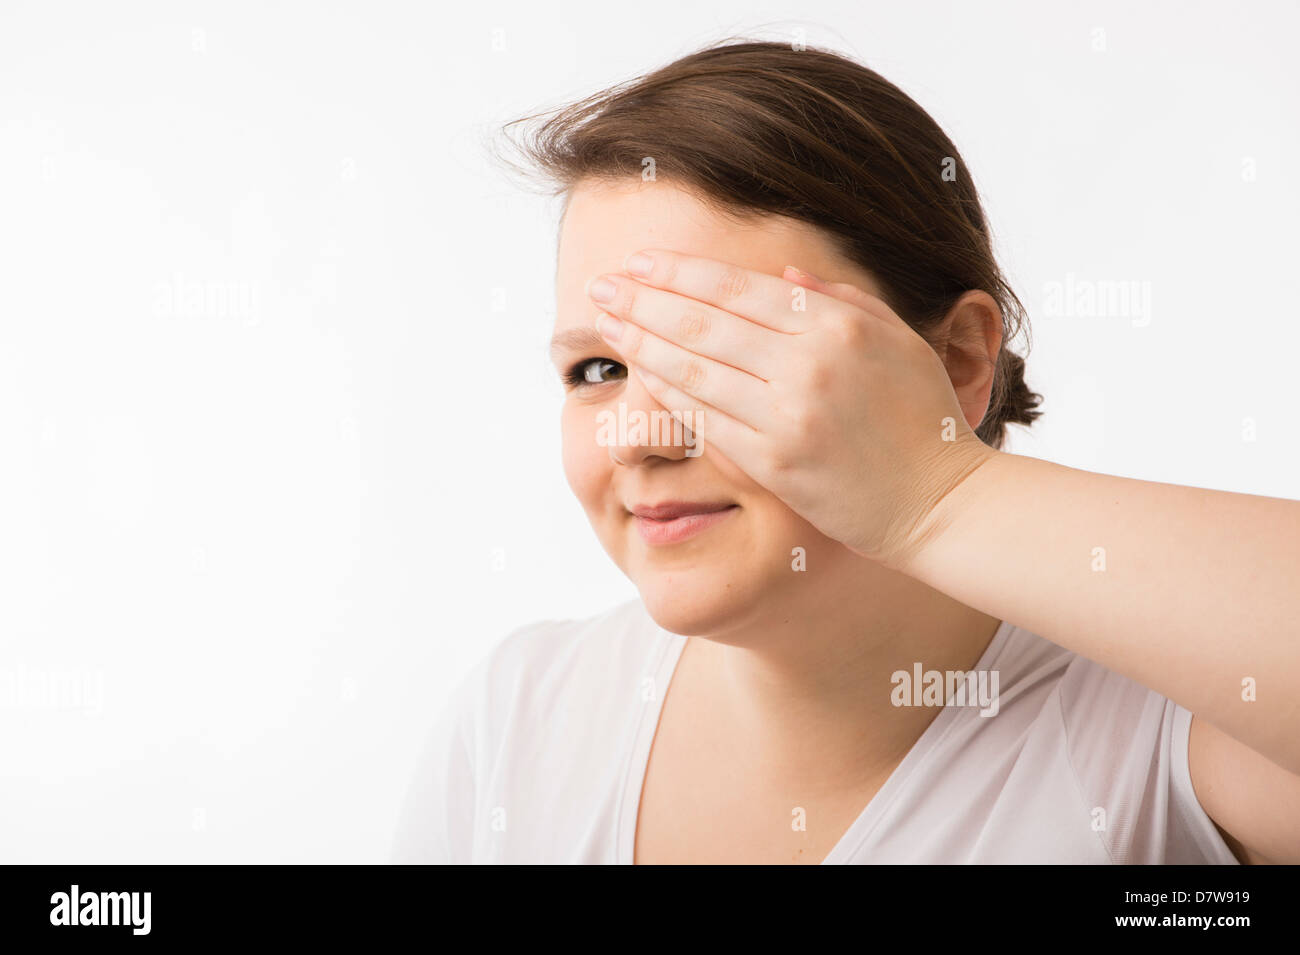 A young brunette teenage Caucasian girl with one hand covering her eye Stock Photo